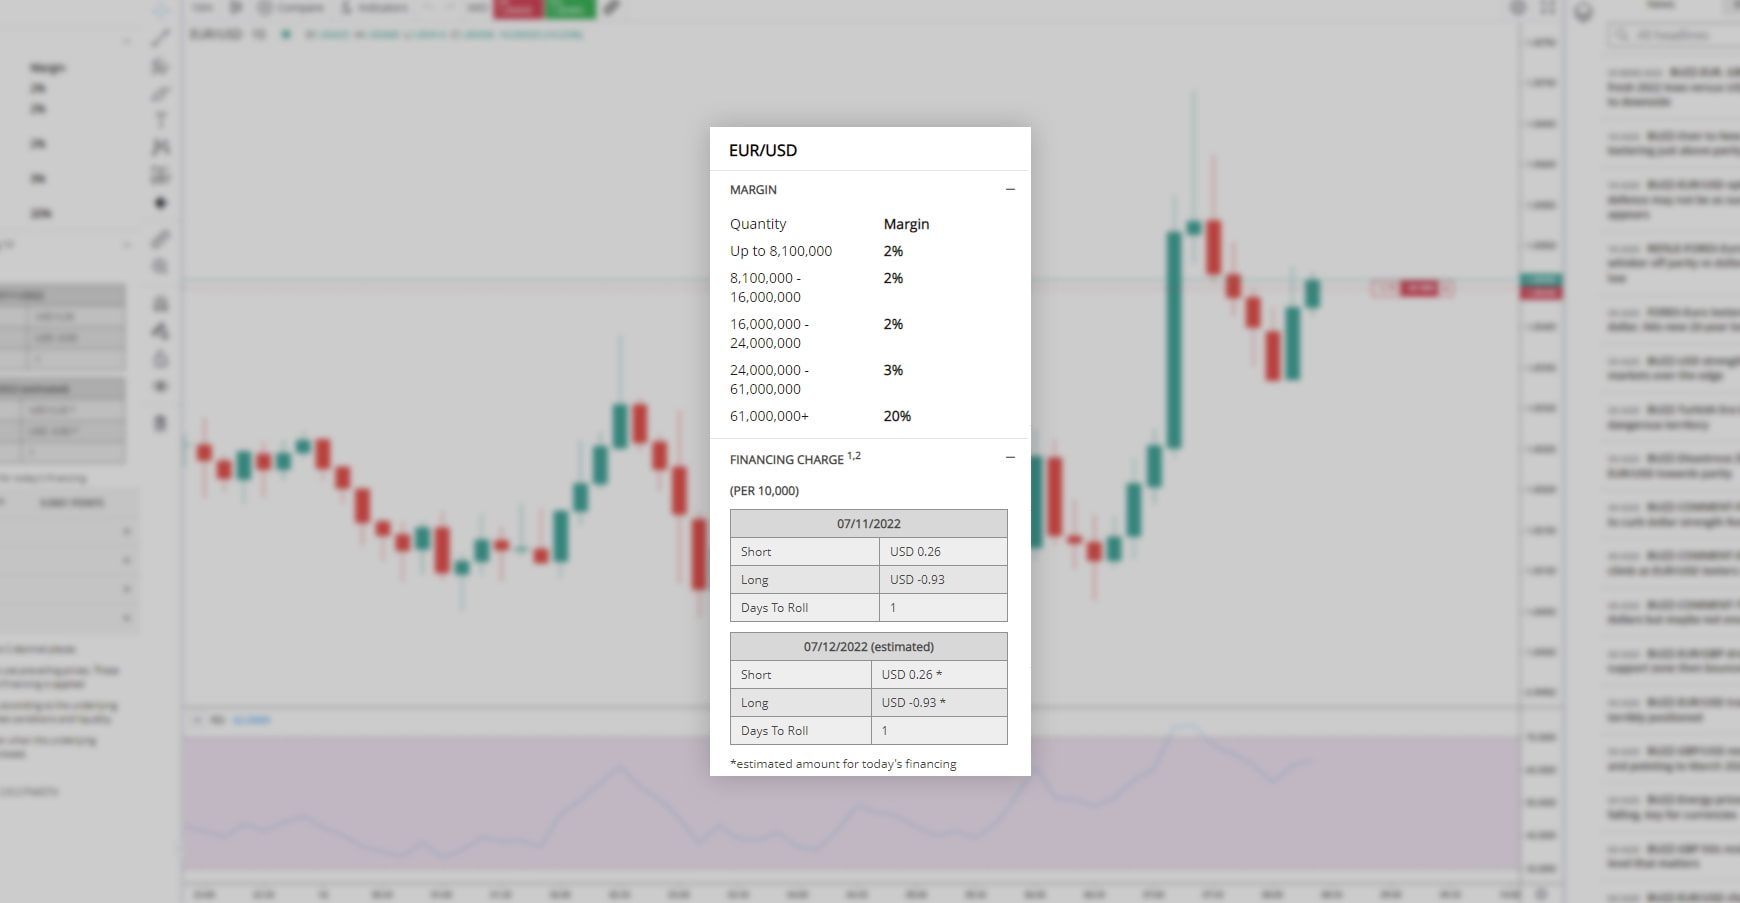 FOREX.com web trader app screen showing margins and financing charge